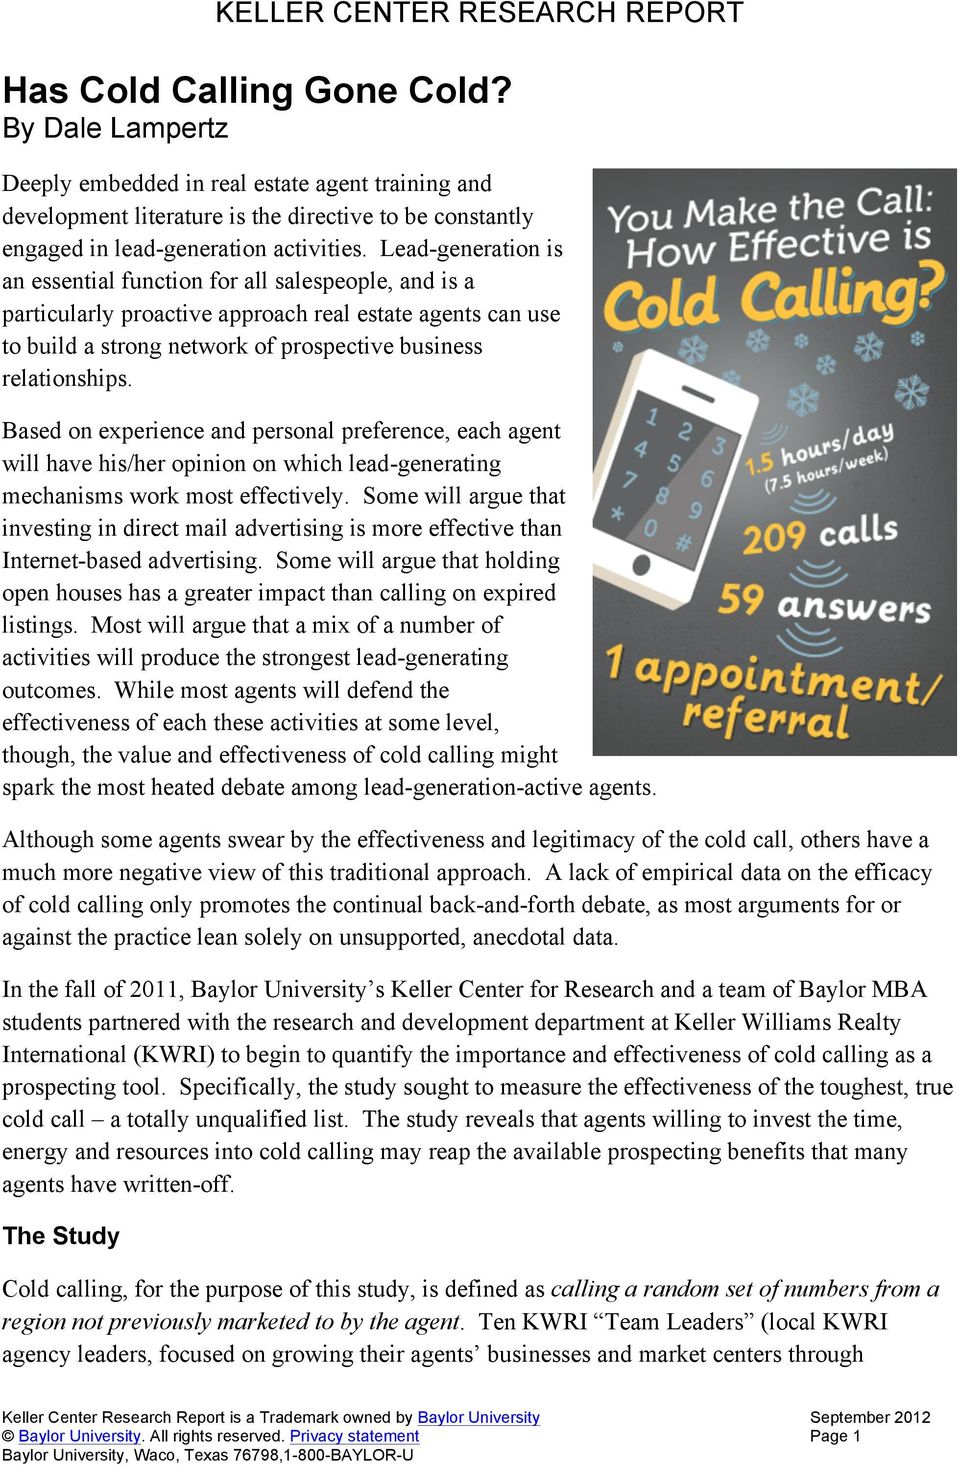 has cold calling gone cold? by dale lampertz - pdf